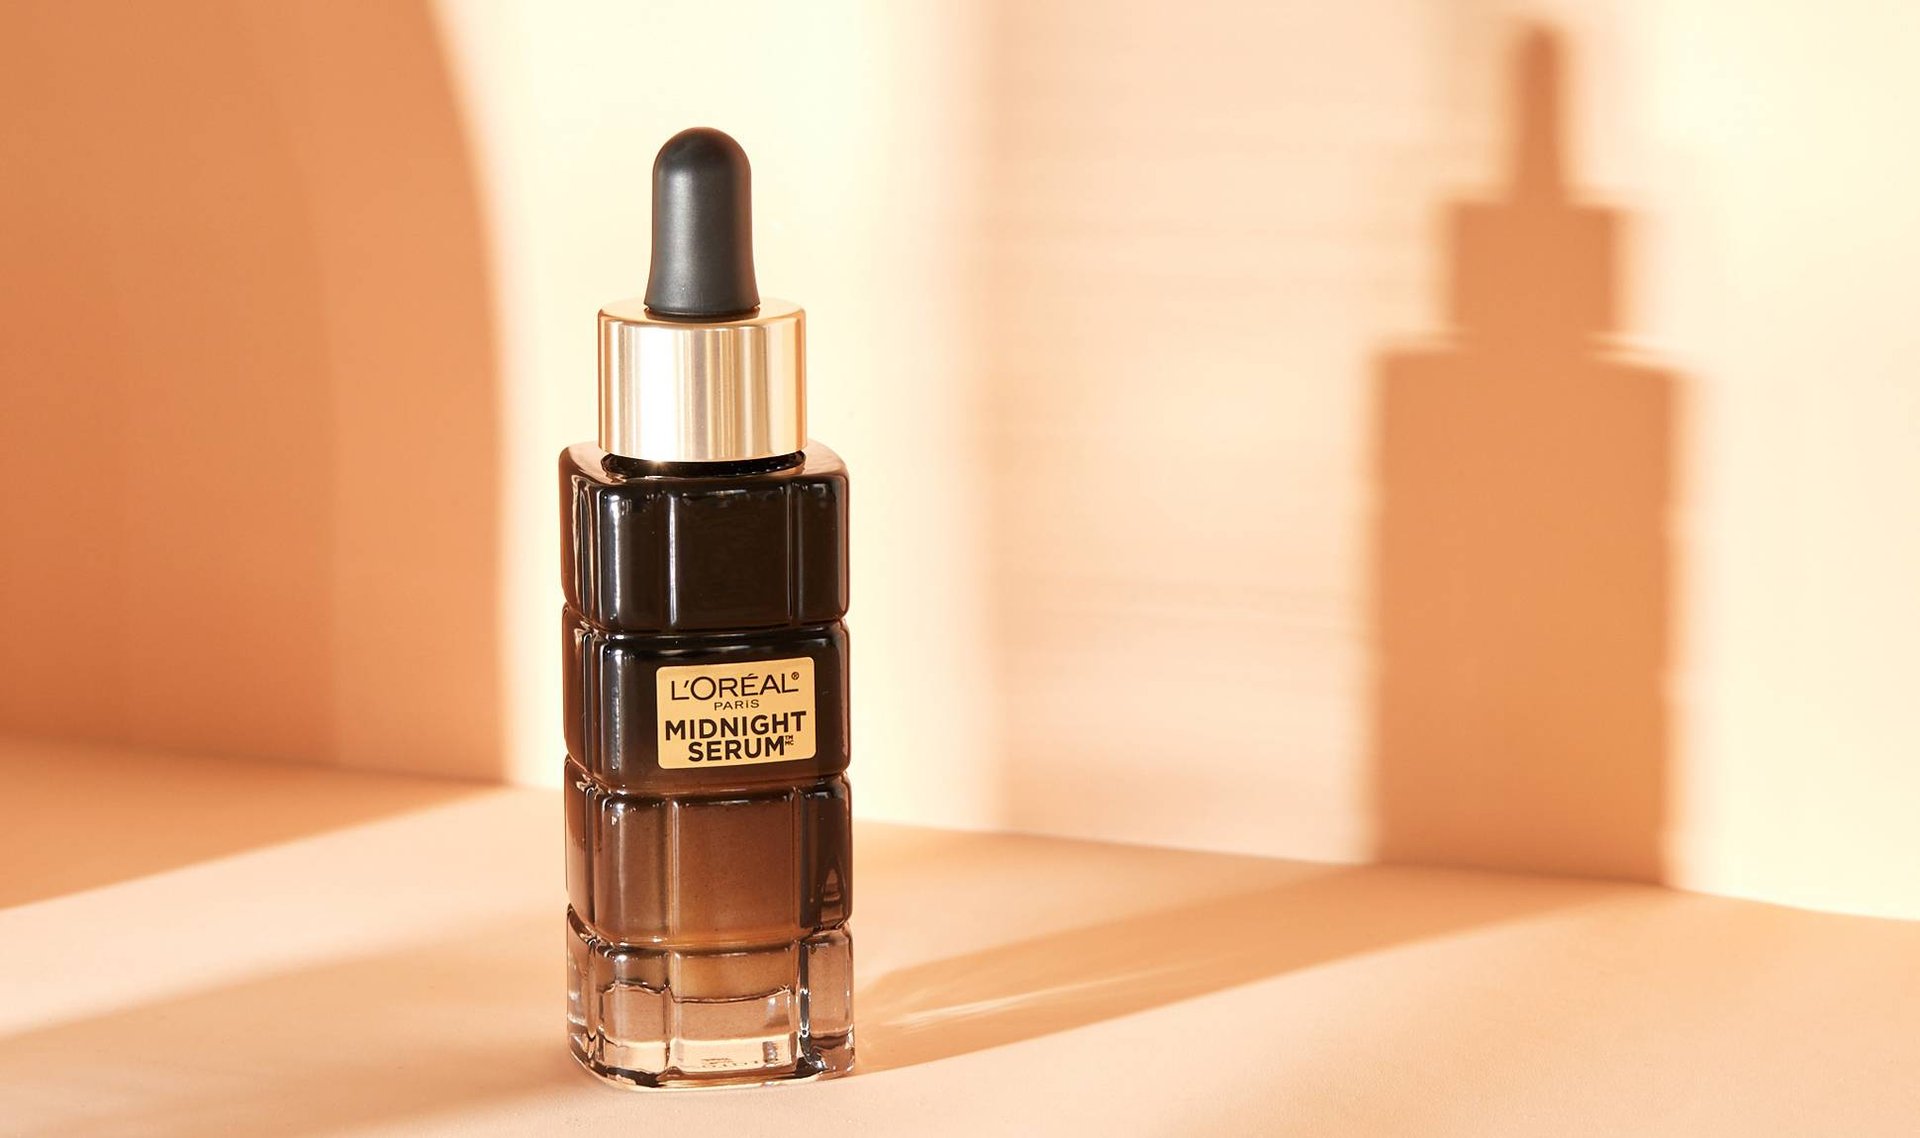 I Tested the L’Oréal Paris Midnight Serum and Woke Up With the Brightest Complexion